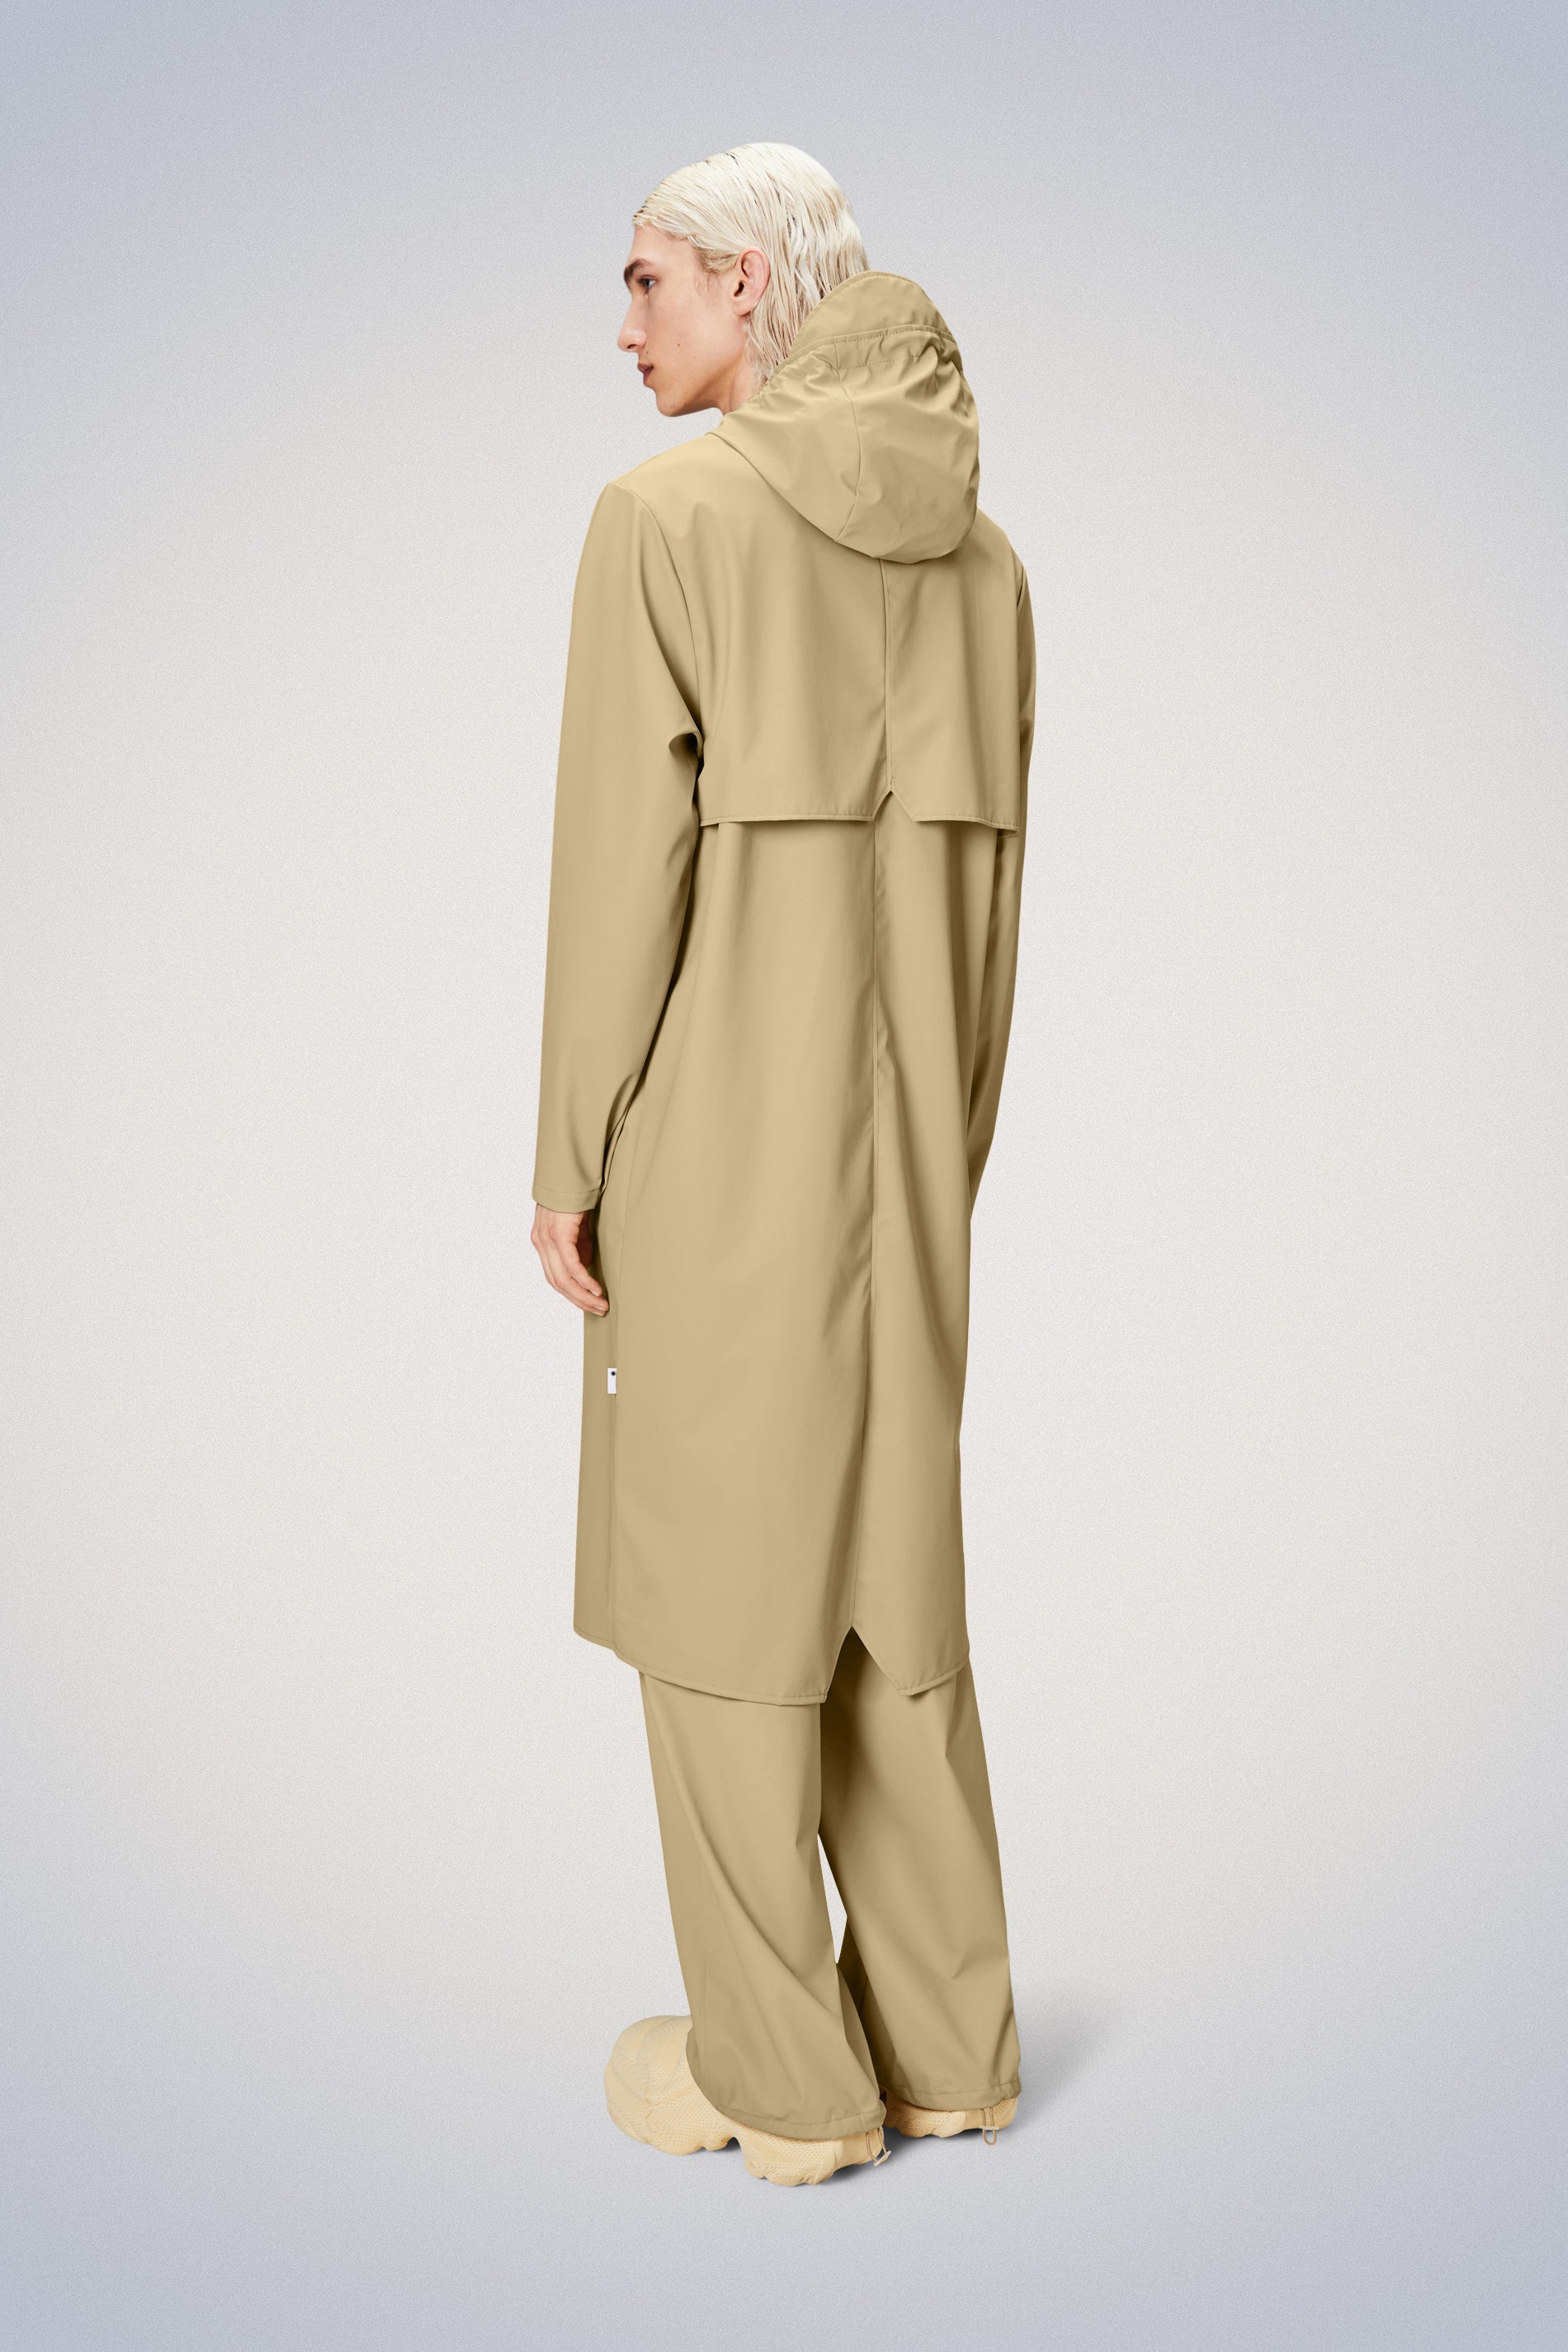 Rains® Longer Jacket in Sand for £105 | Free Shipping